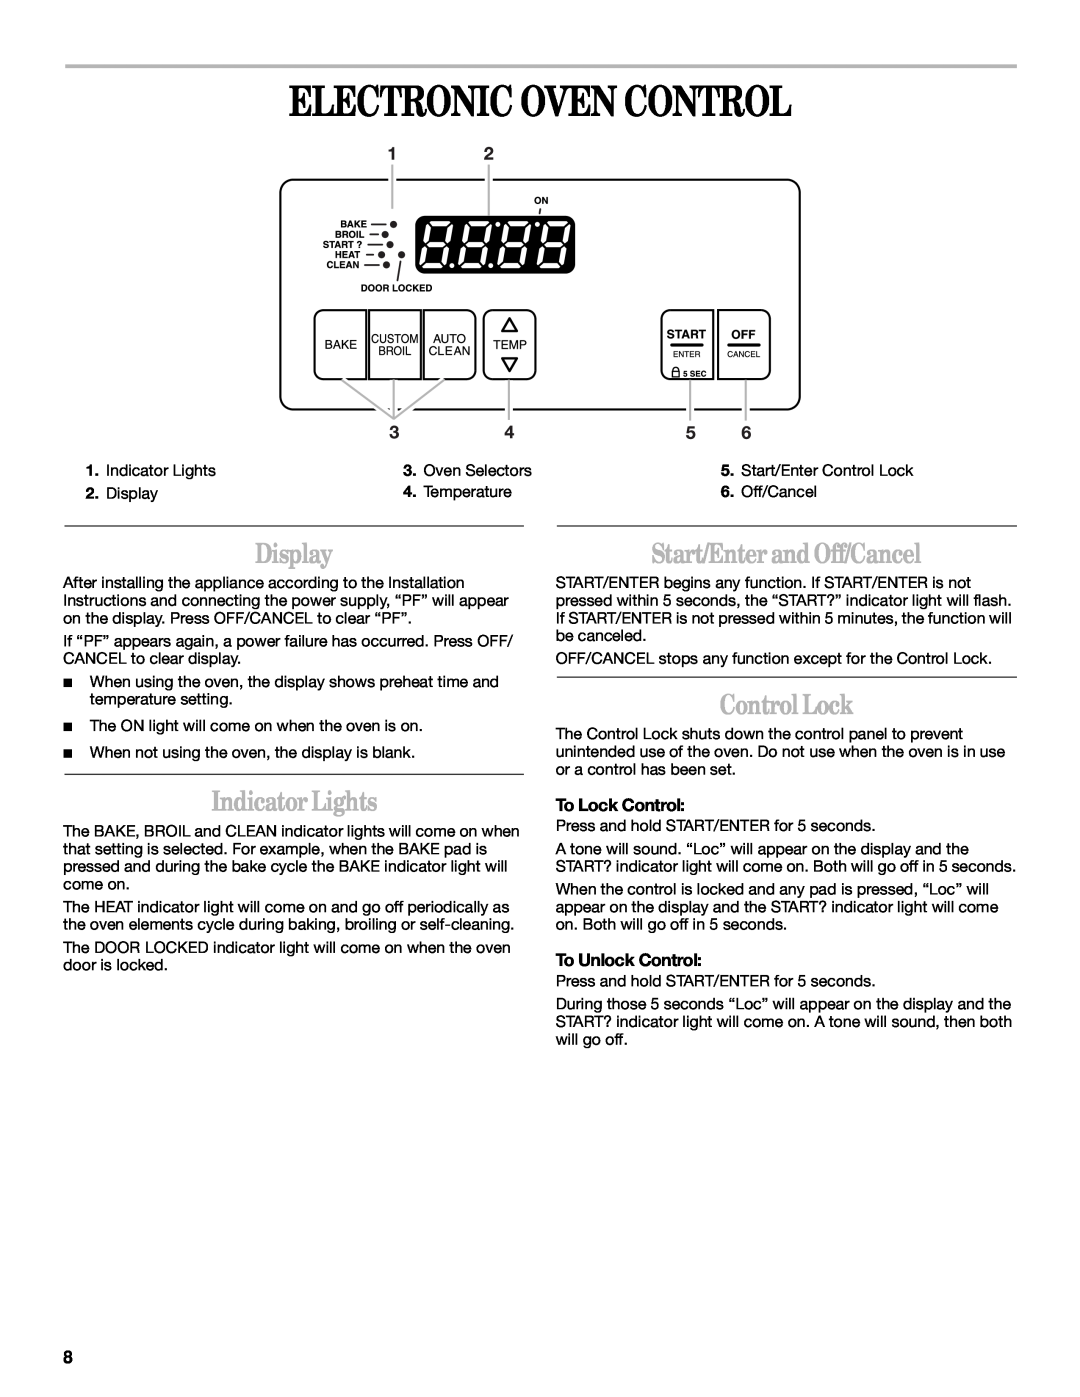 Whirlpool SF340BEH, SF357BEH Electronic Oven Control, Display, Indicator Lights, Start/Enter and Off/Cancel, Control Lock 